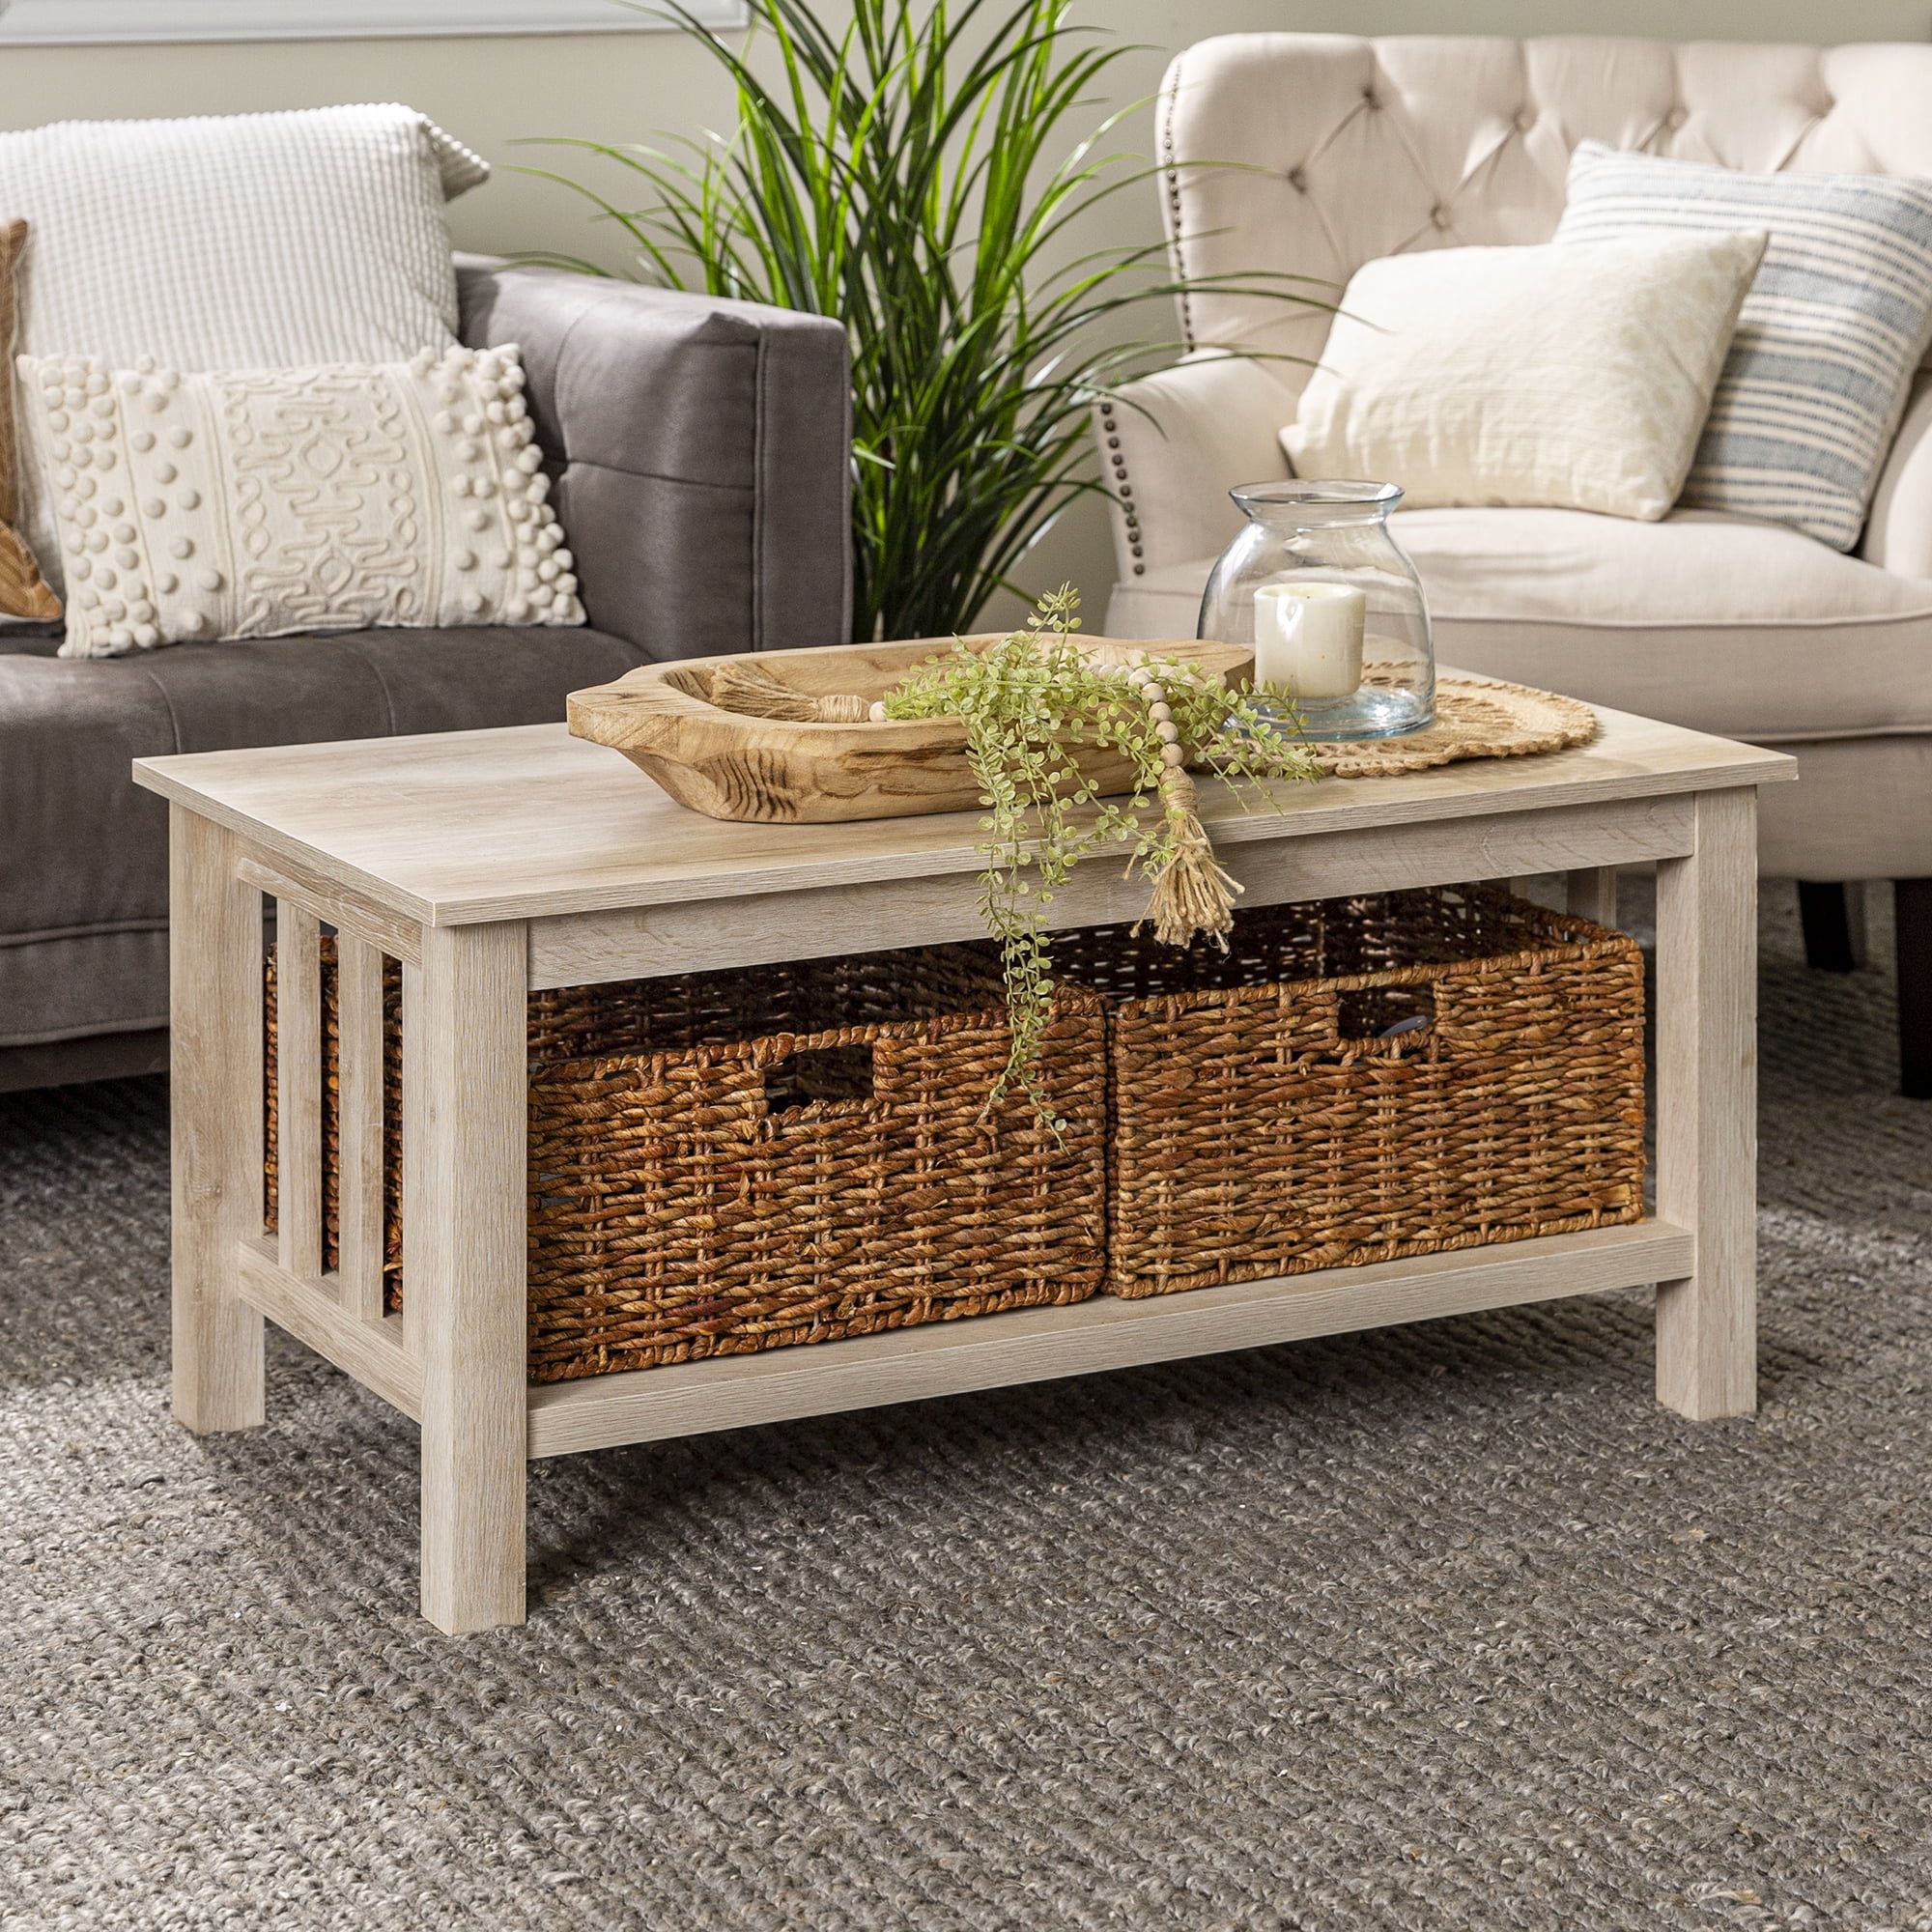 Woven Paths Traditional Storage Coffee Table With Bins, White Oak For Coffee Tables With Storage (Photo 5 of 15)